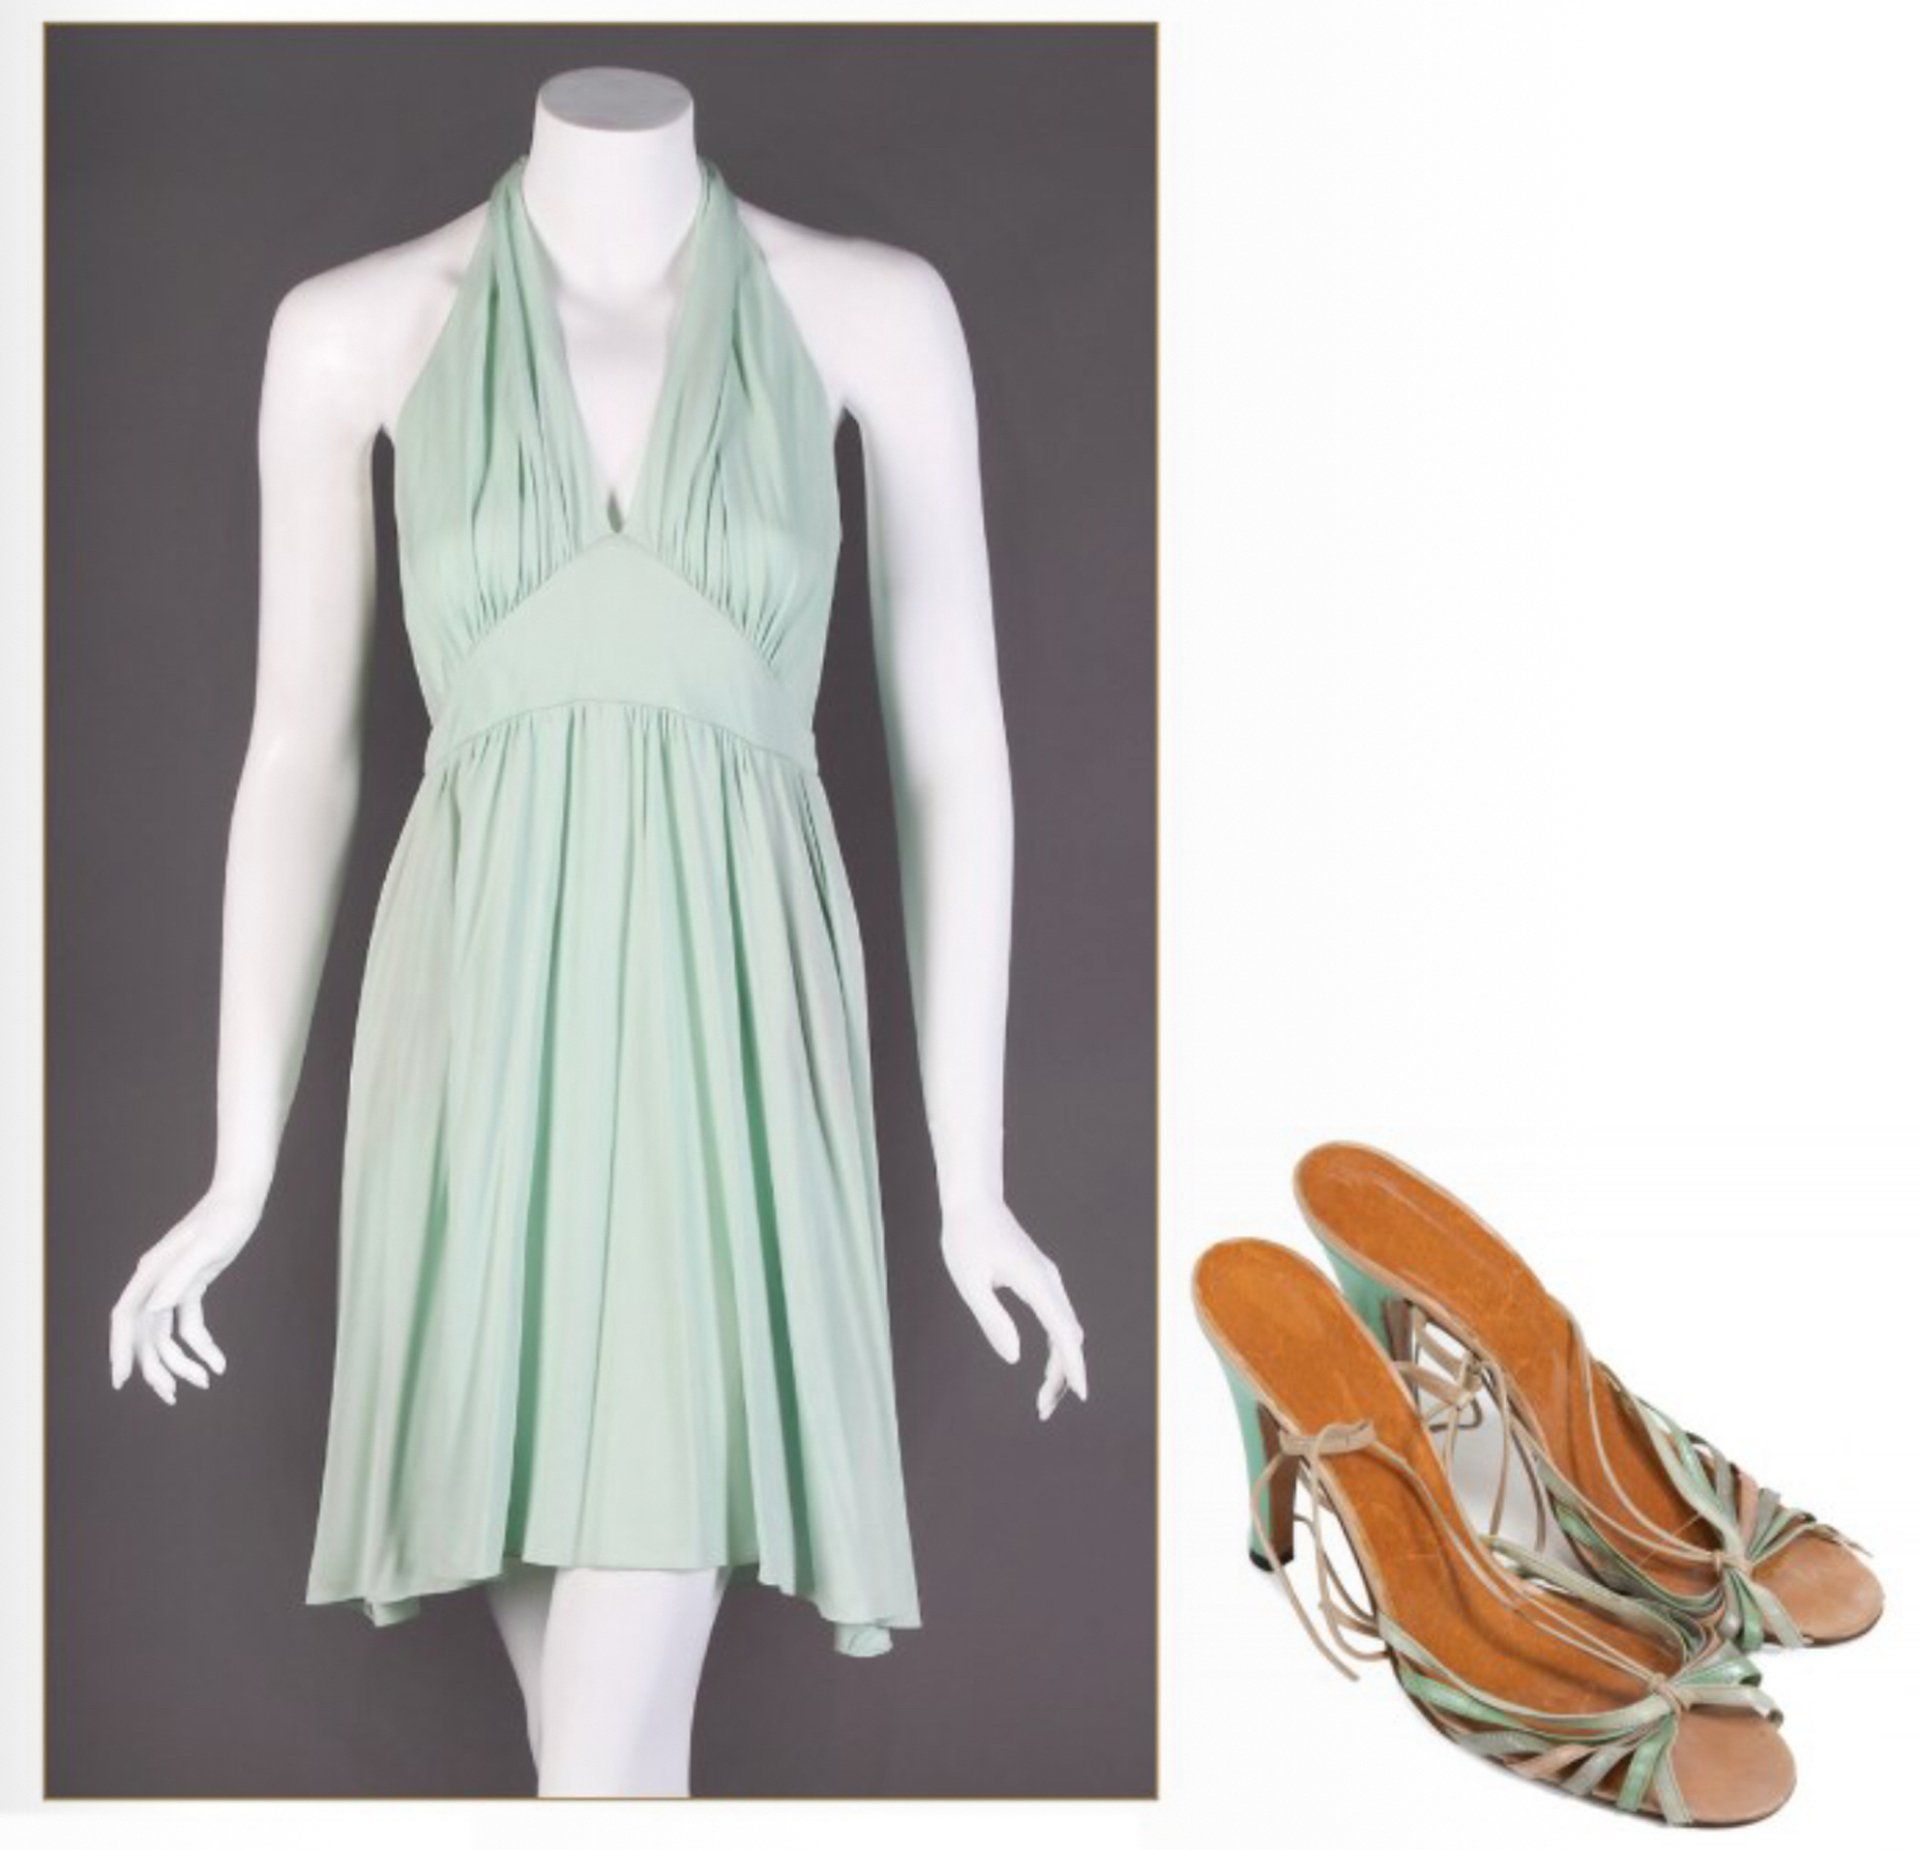 Streisand's halter dress and matching shoes from auction.